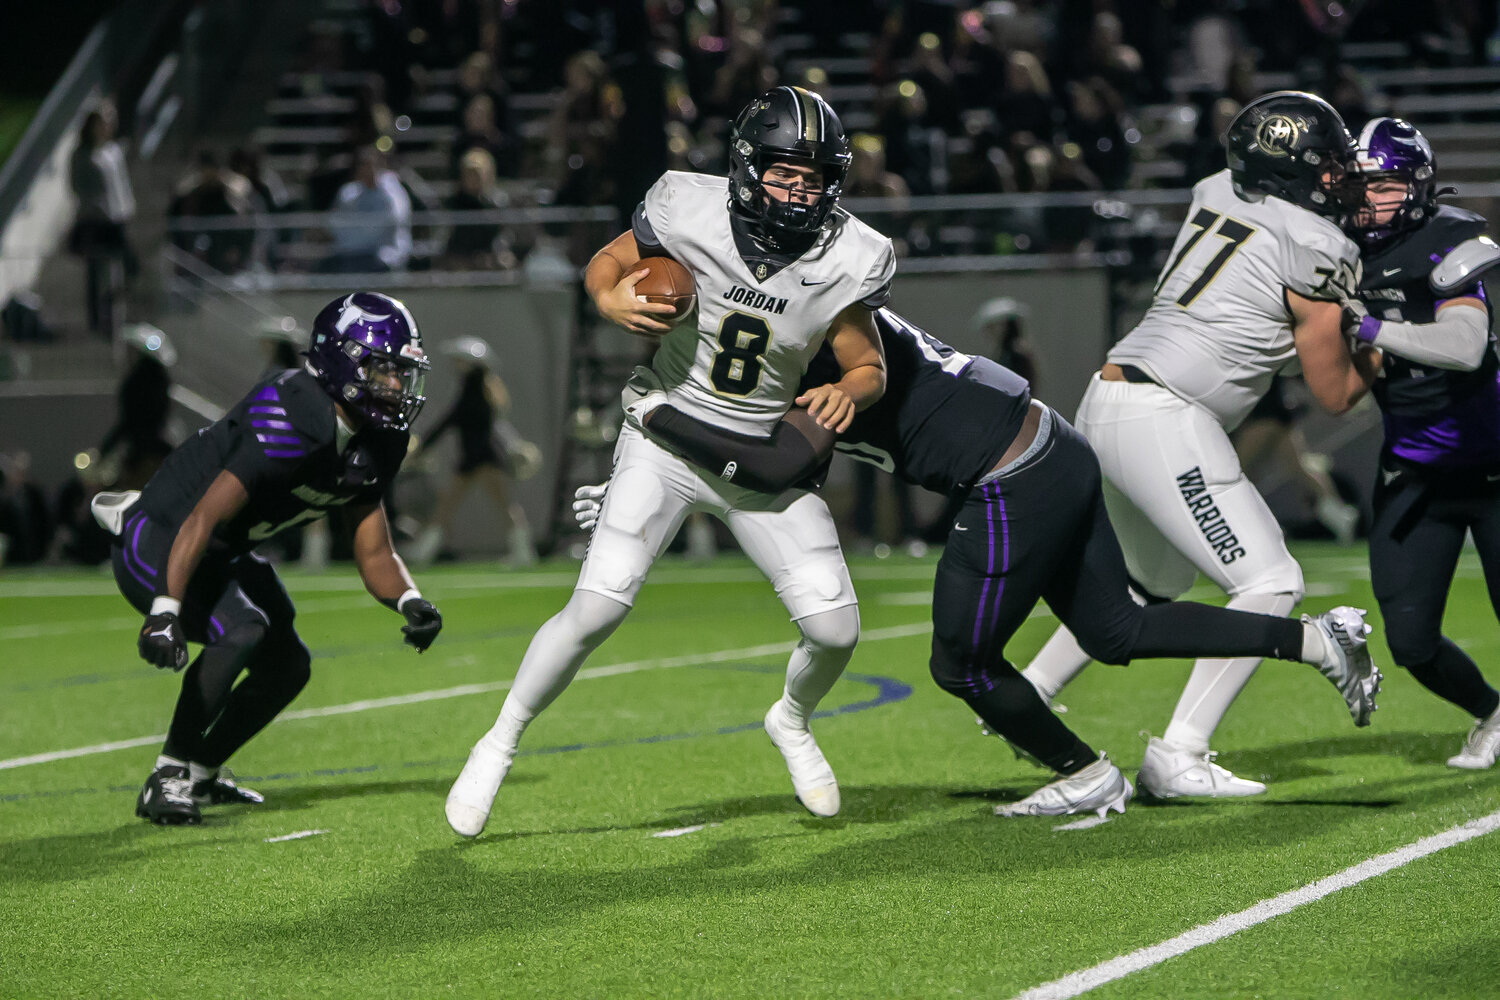 Colin Willetts is brought down for a sack during Thursday's game between Jordan and Morton Ranch at Legacy Stadium.